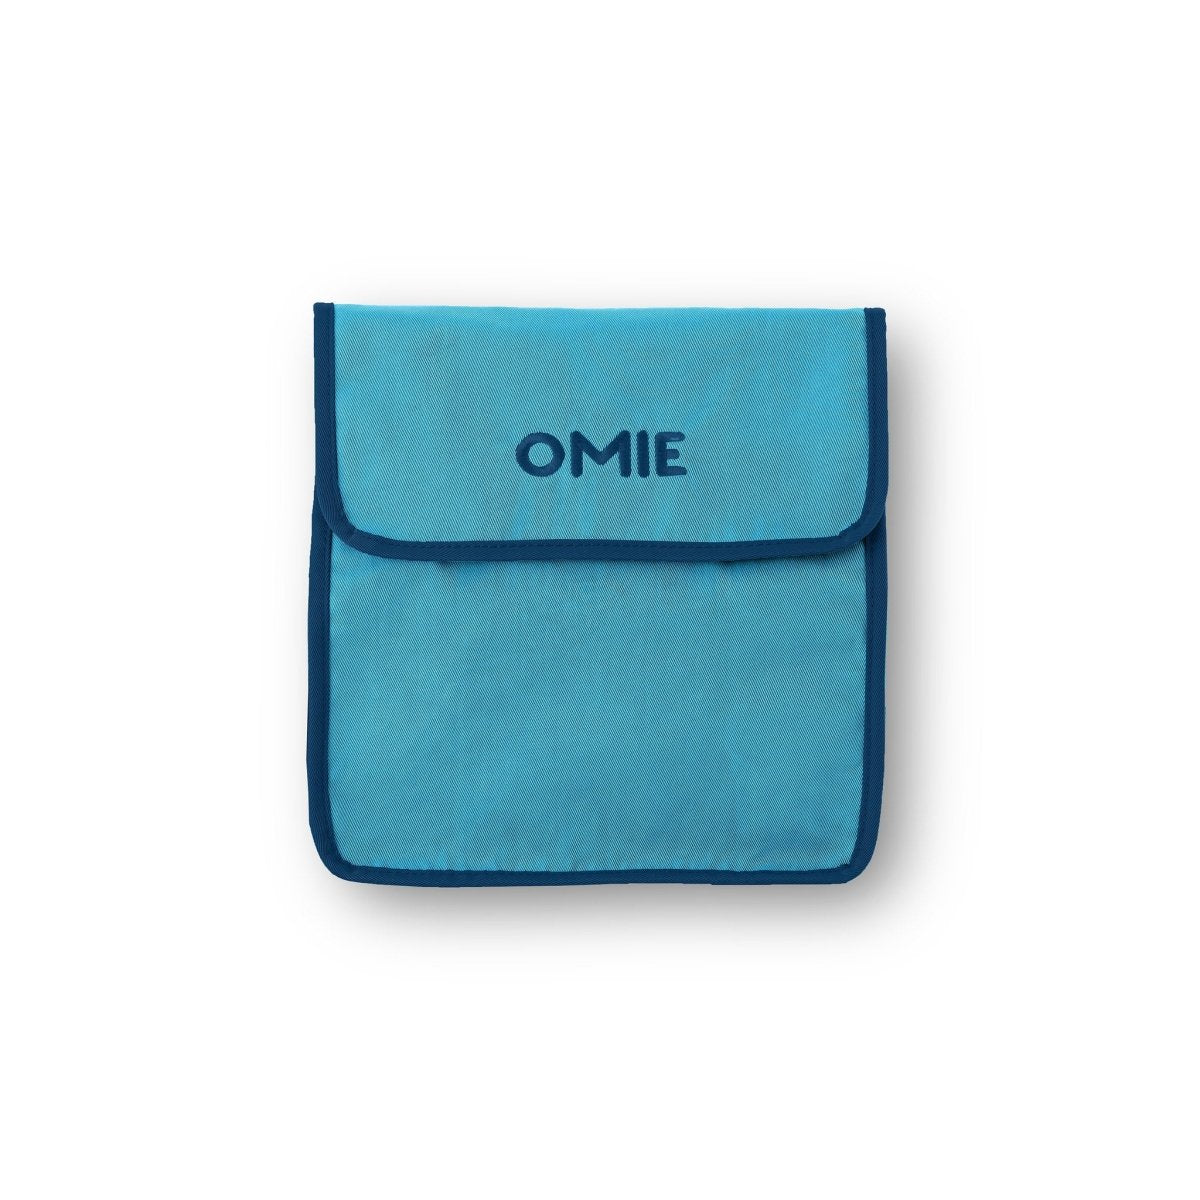 OmieChill Food Pouch Cooler for OmieBox - Pink 